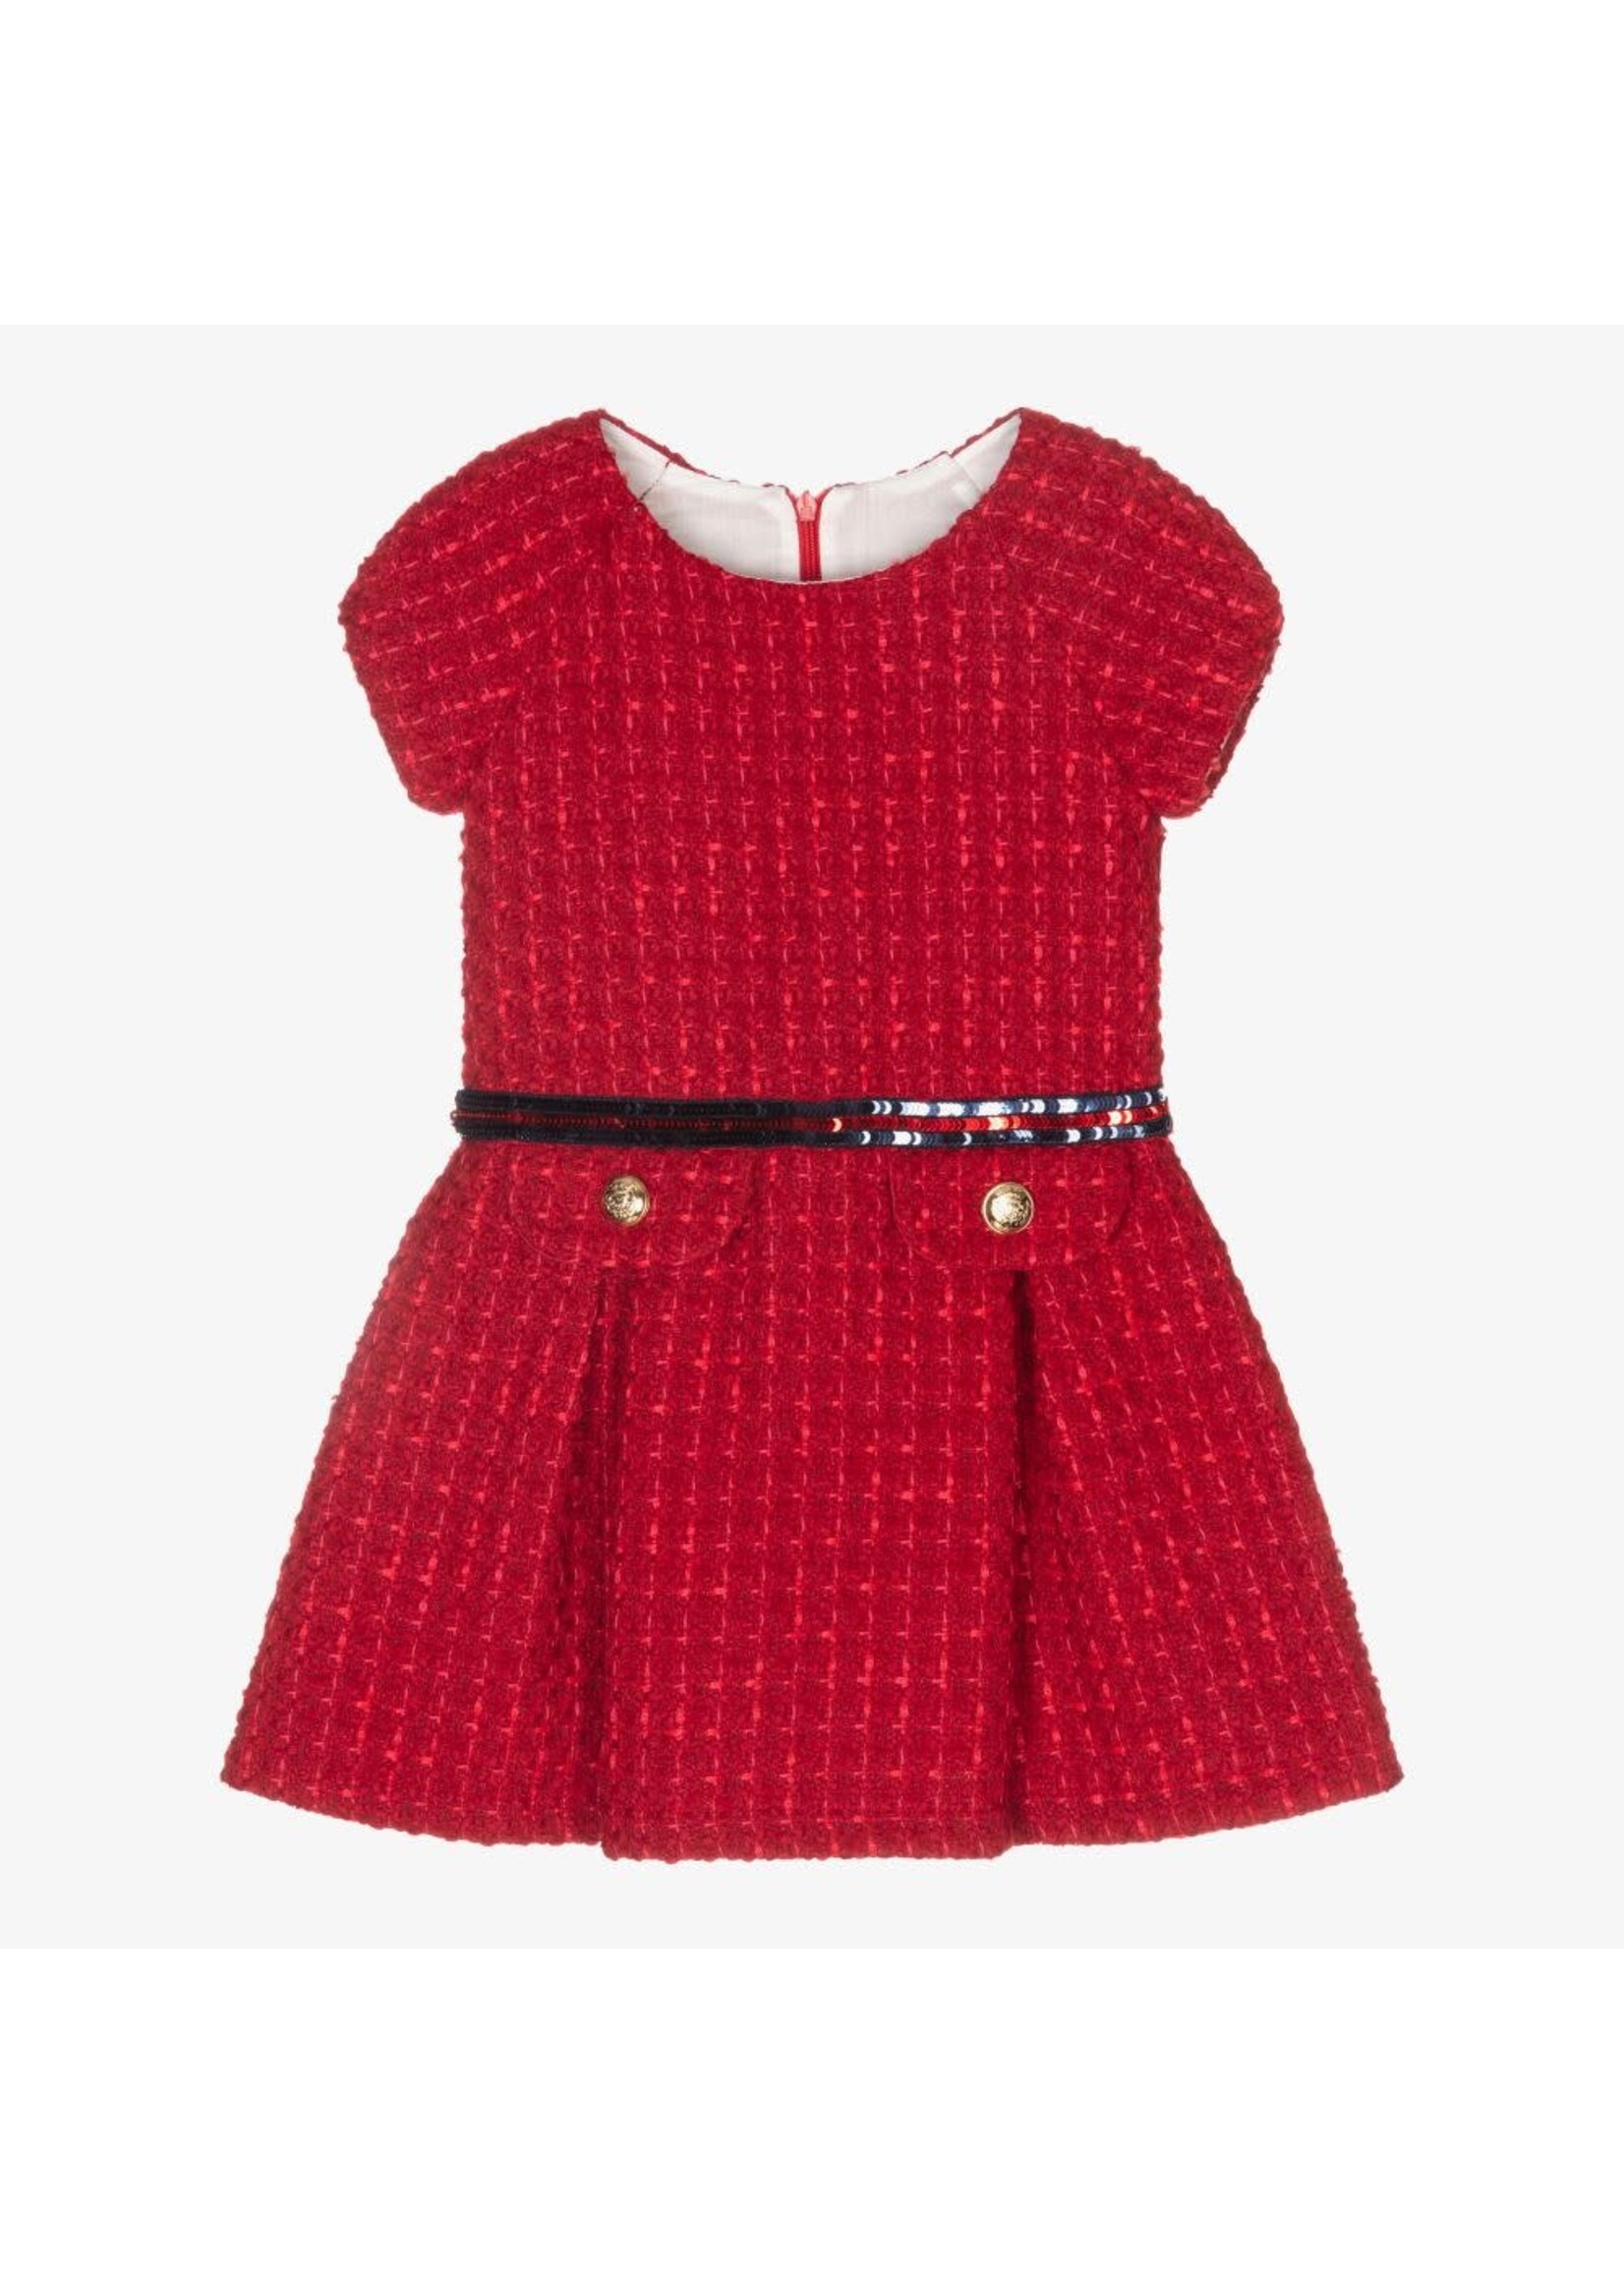 Balloon Chic Balloon Chic  Dress red whith gold button